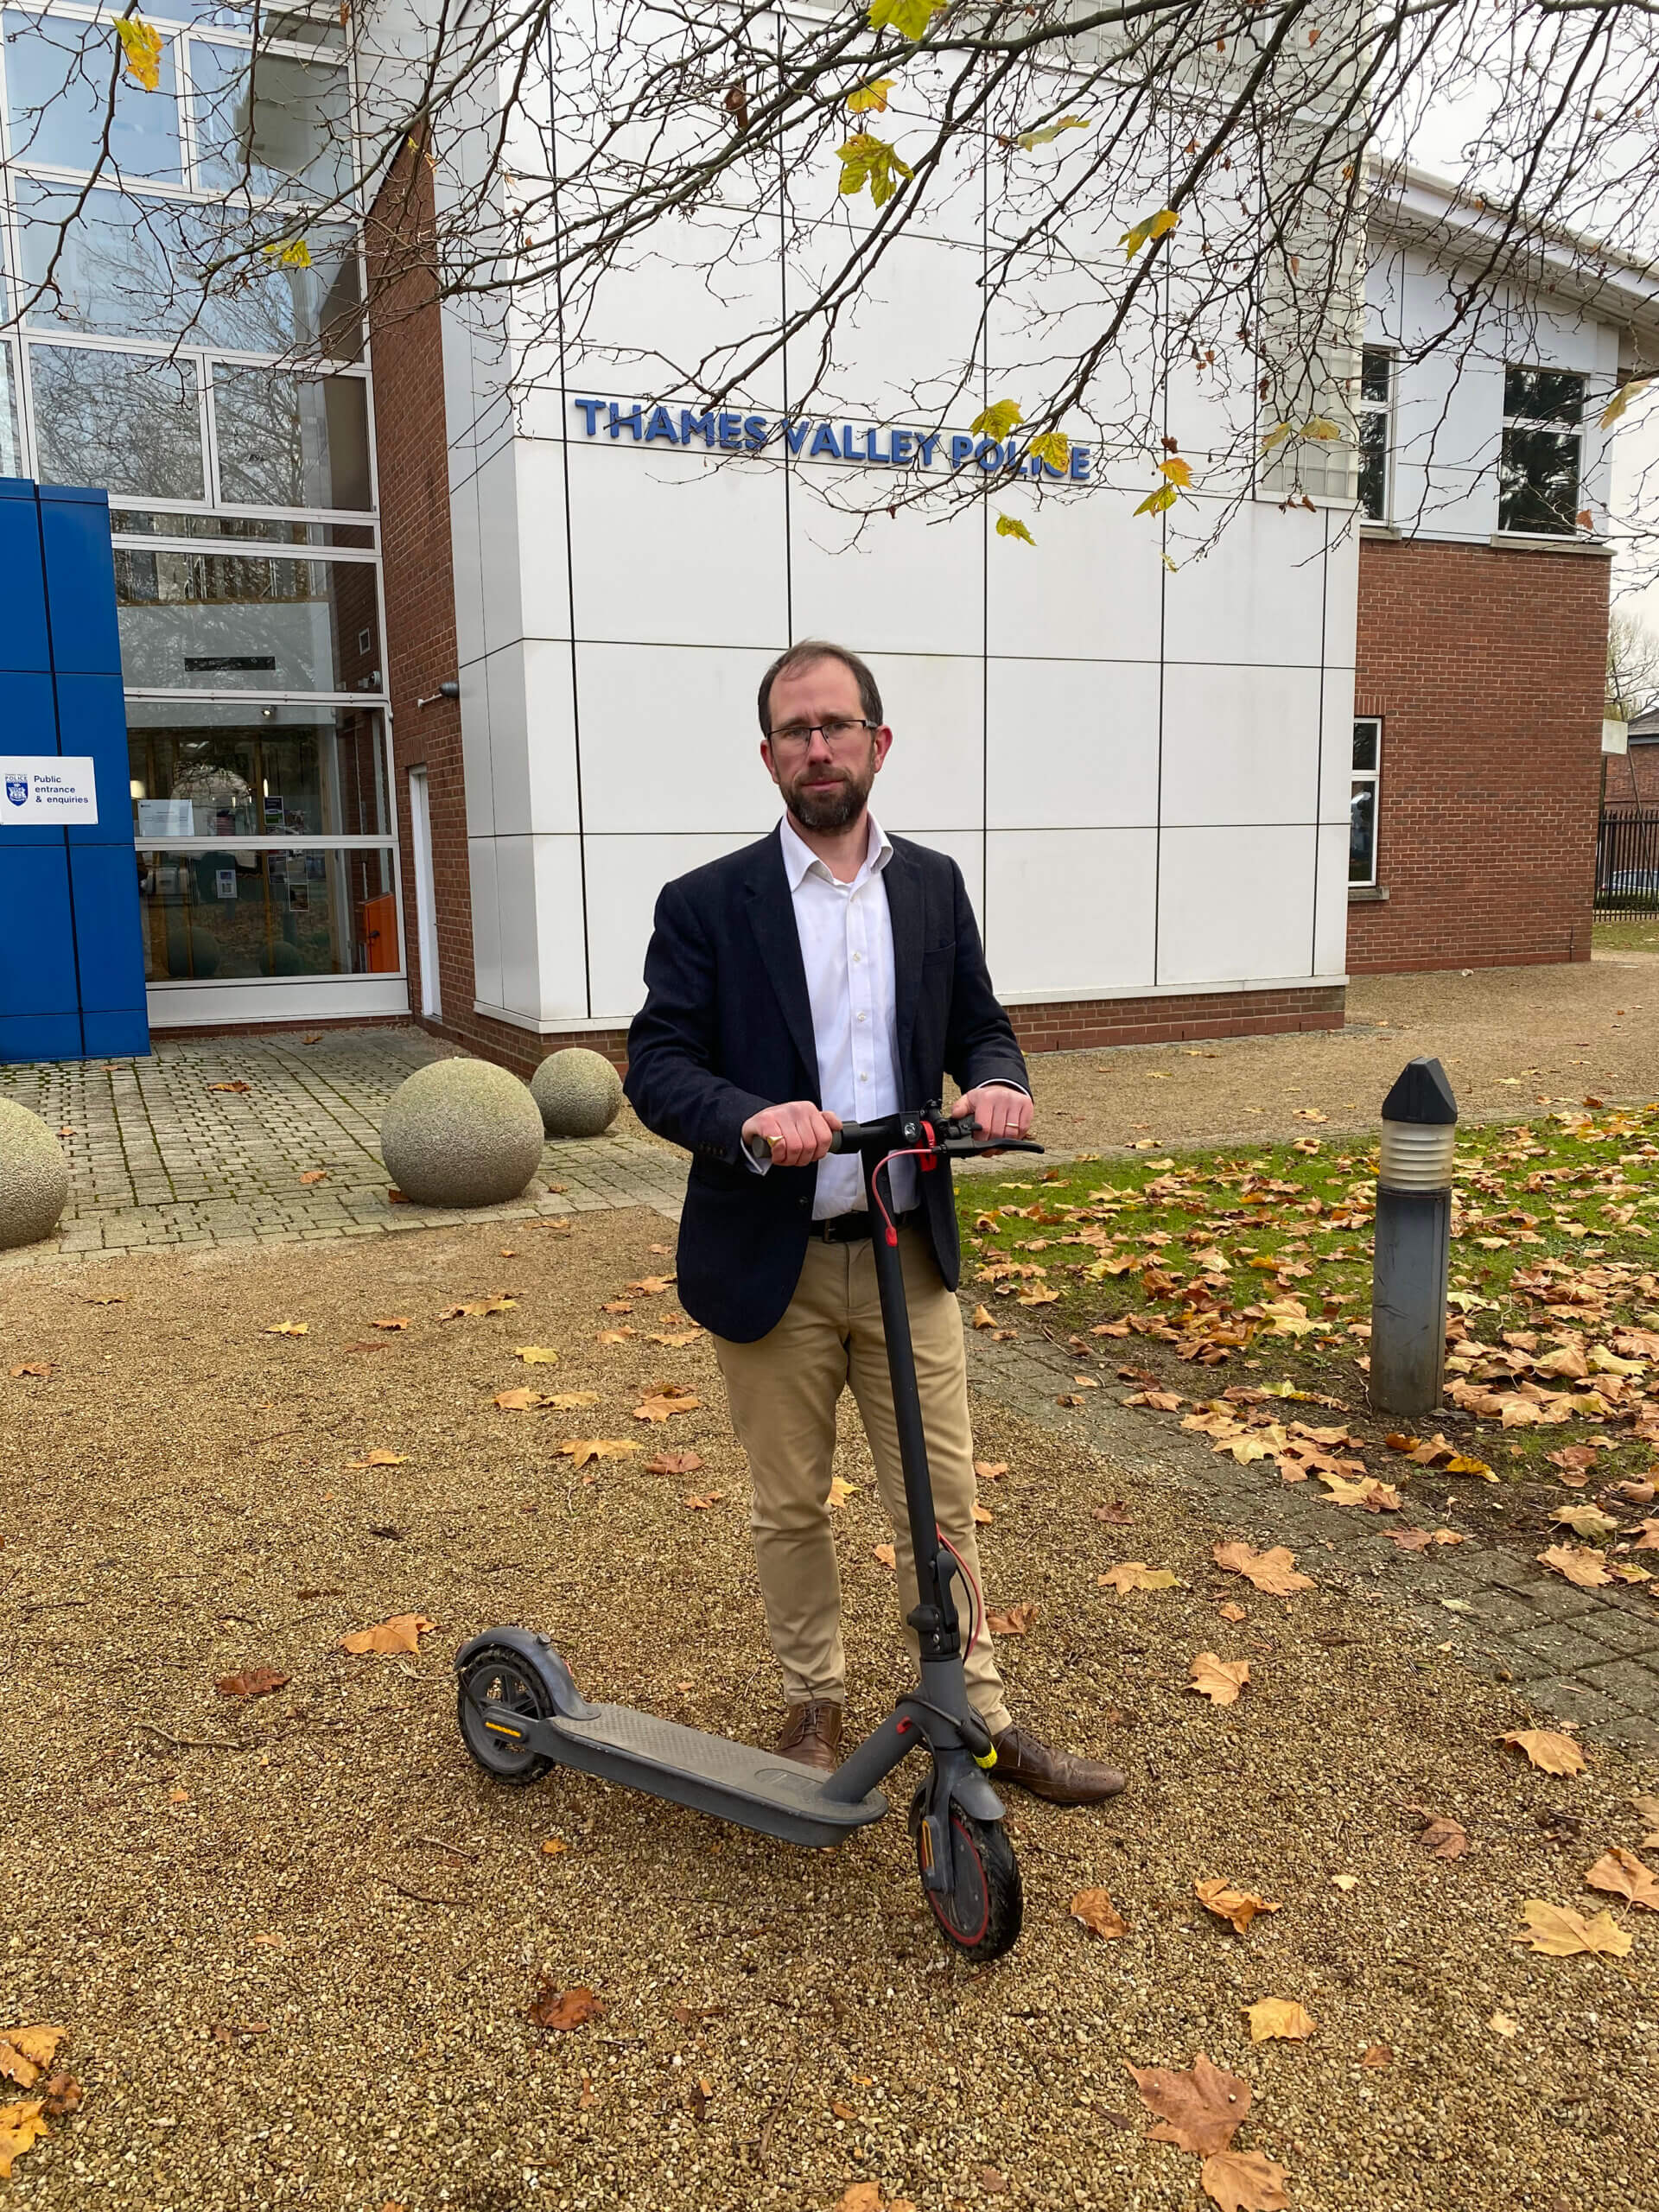 Matthew Barber with an e-scooter